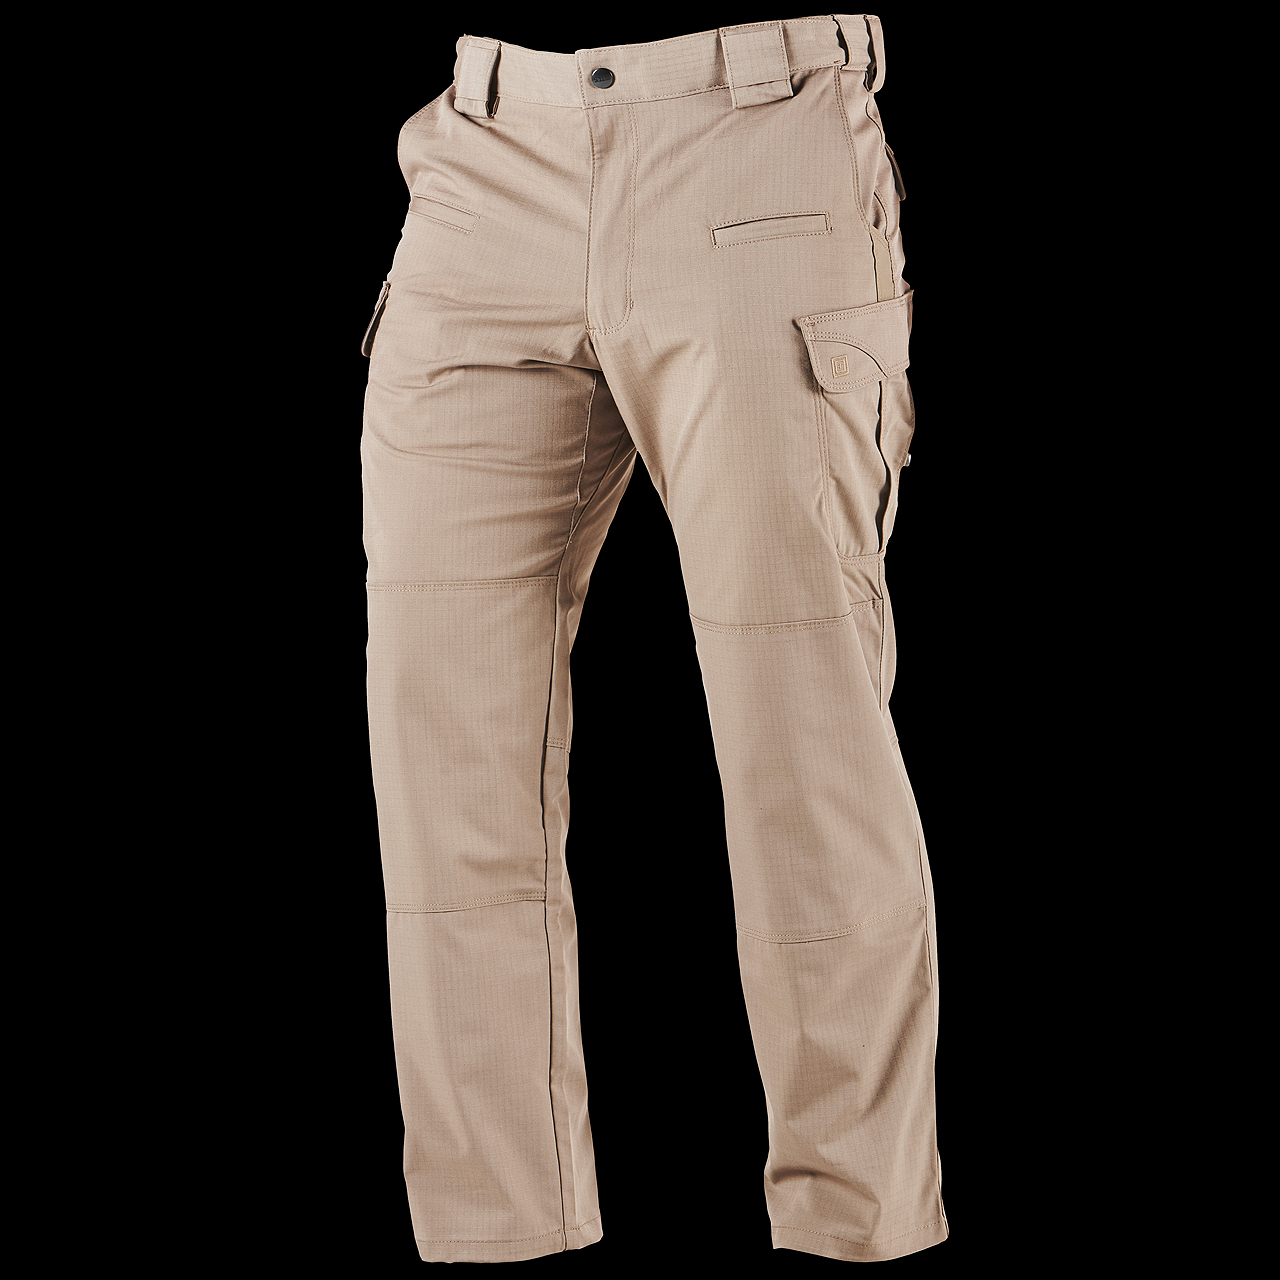 5.11 Tactical UK, 5.11 Clothing, Trousers & Gear